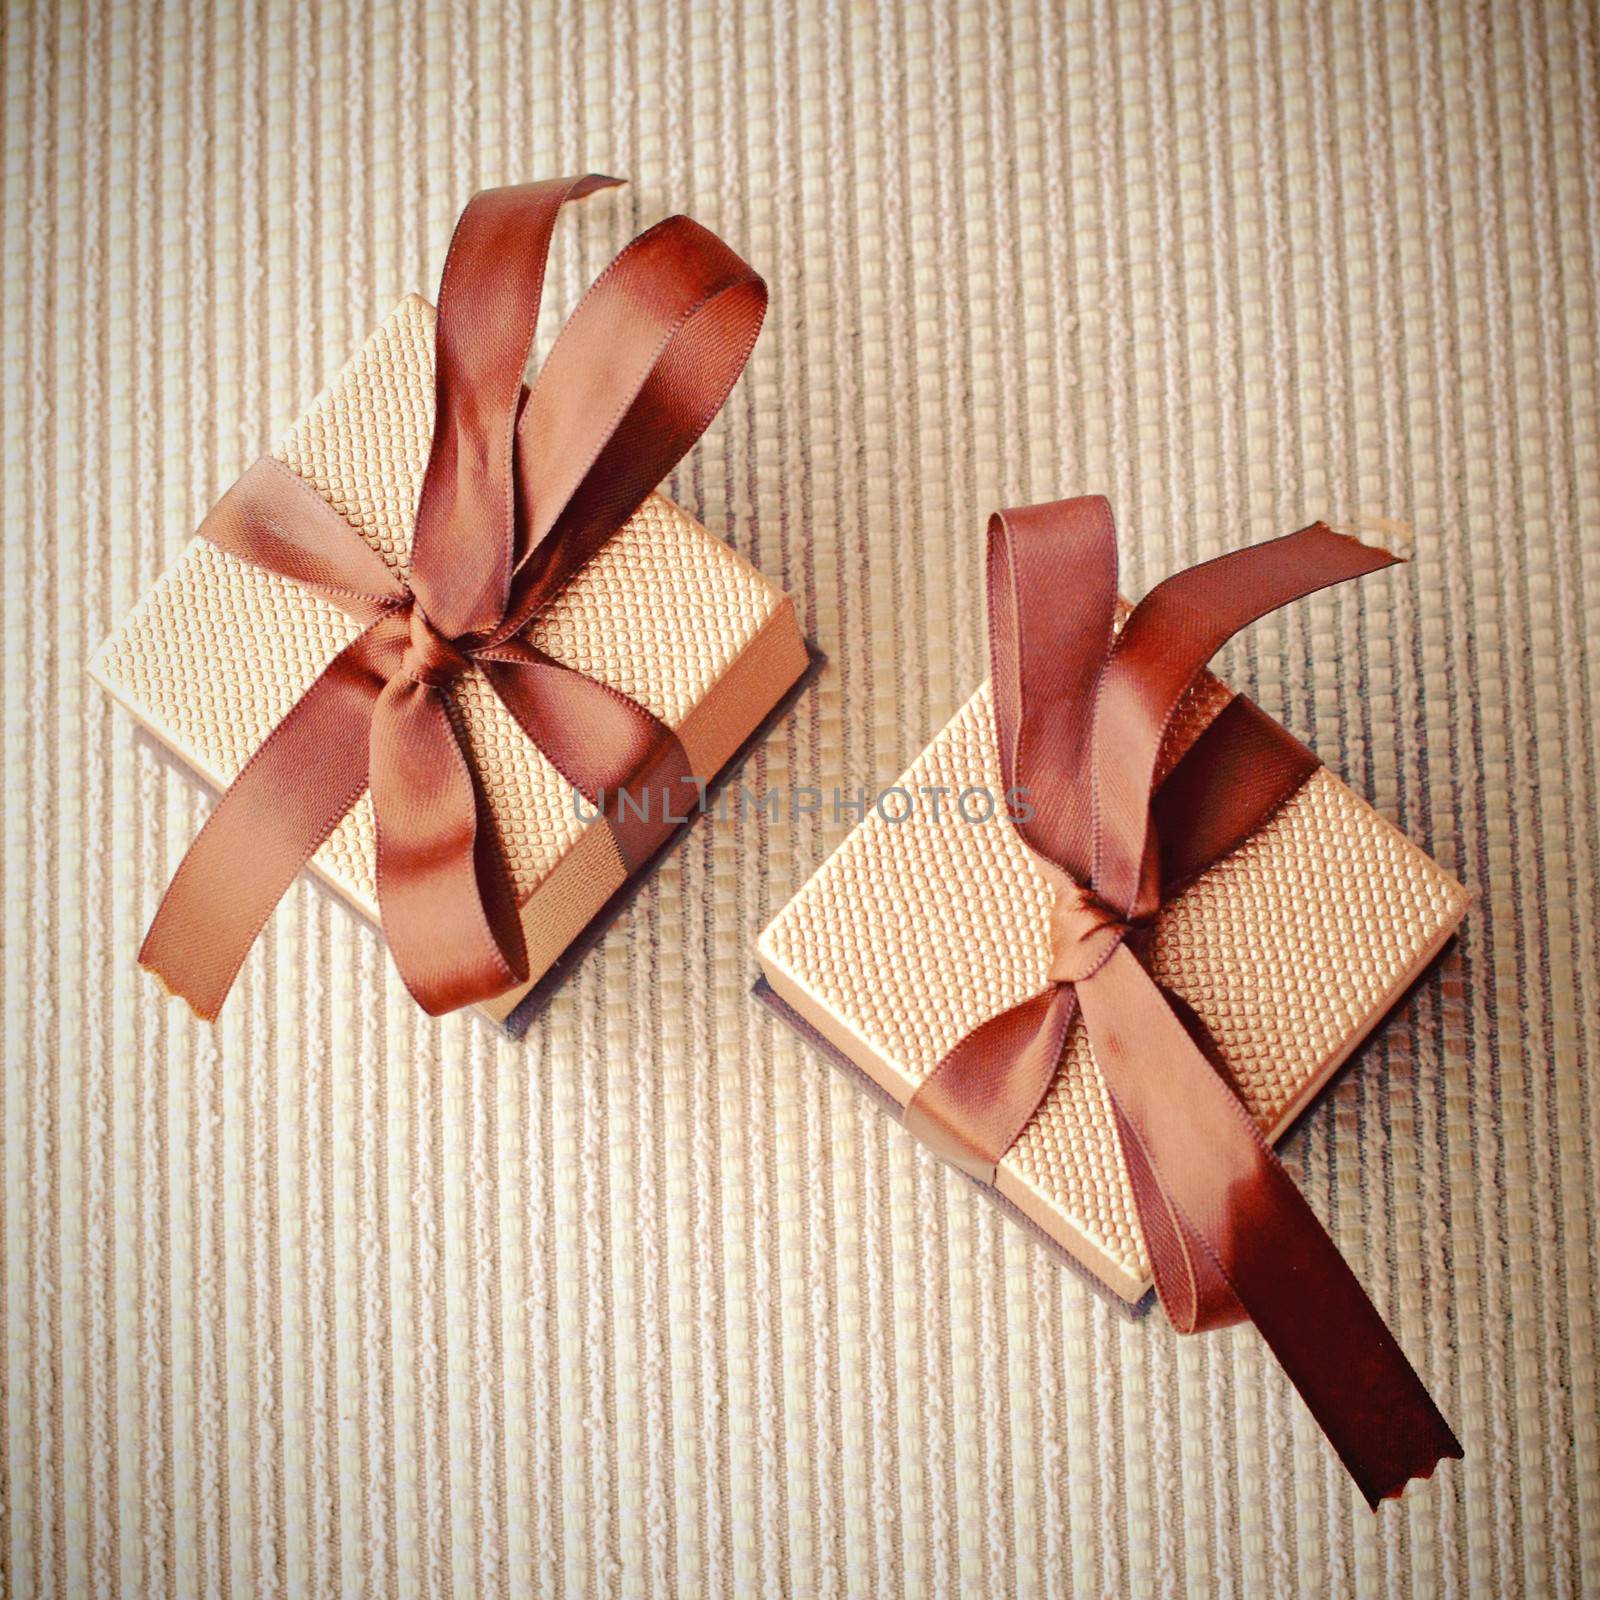 Luxury gift boxes with ribbon, retro filter effect  by nuchylee